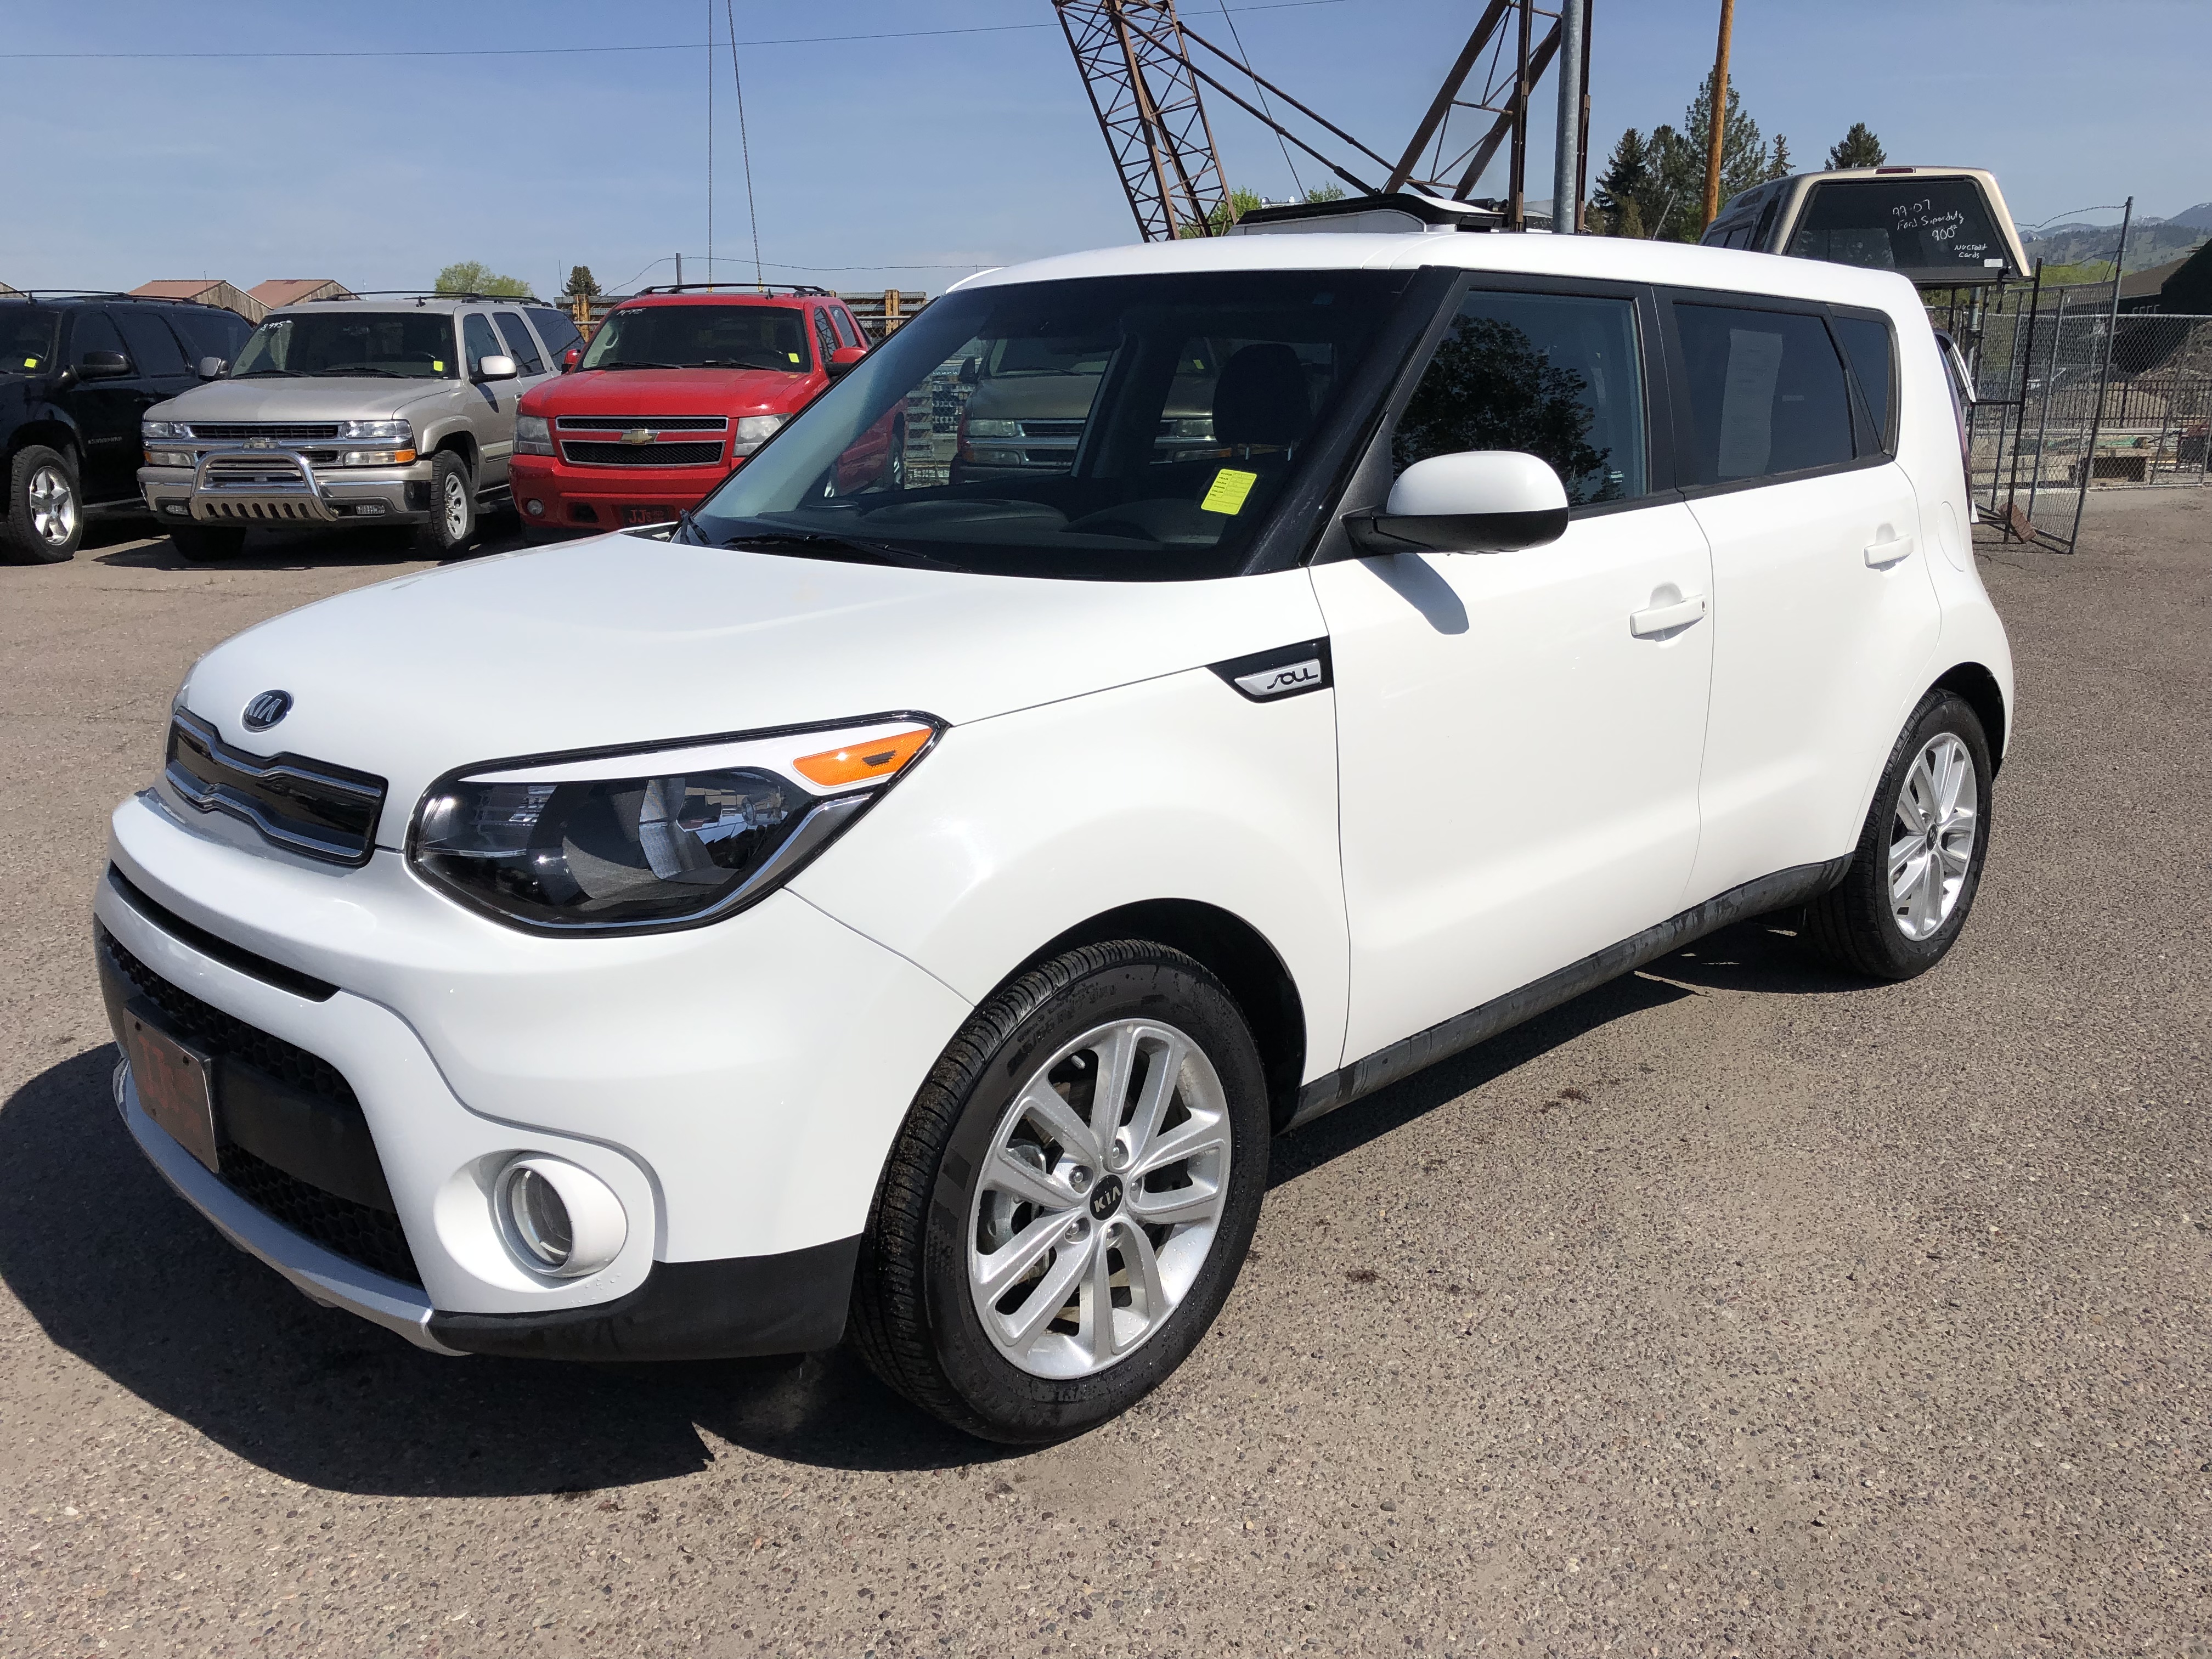 KIA Soul accessories specifications